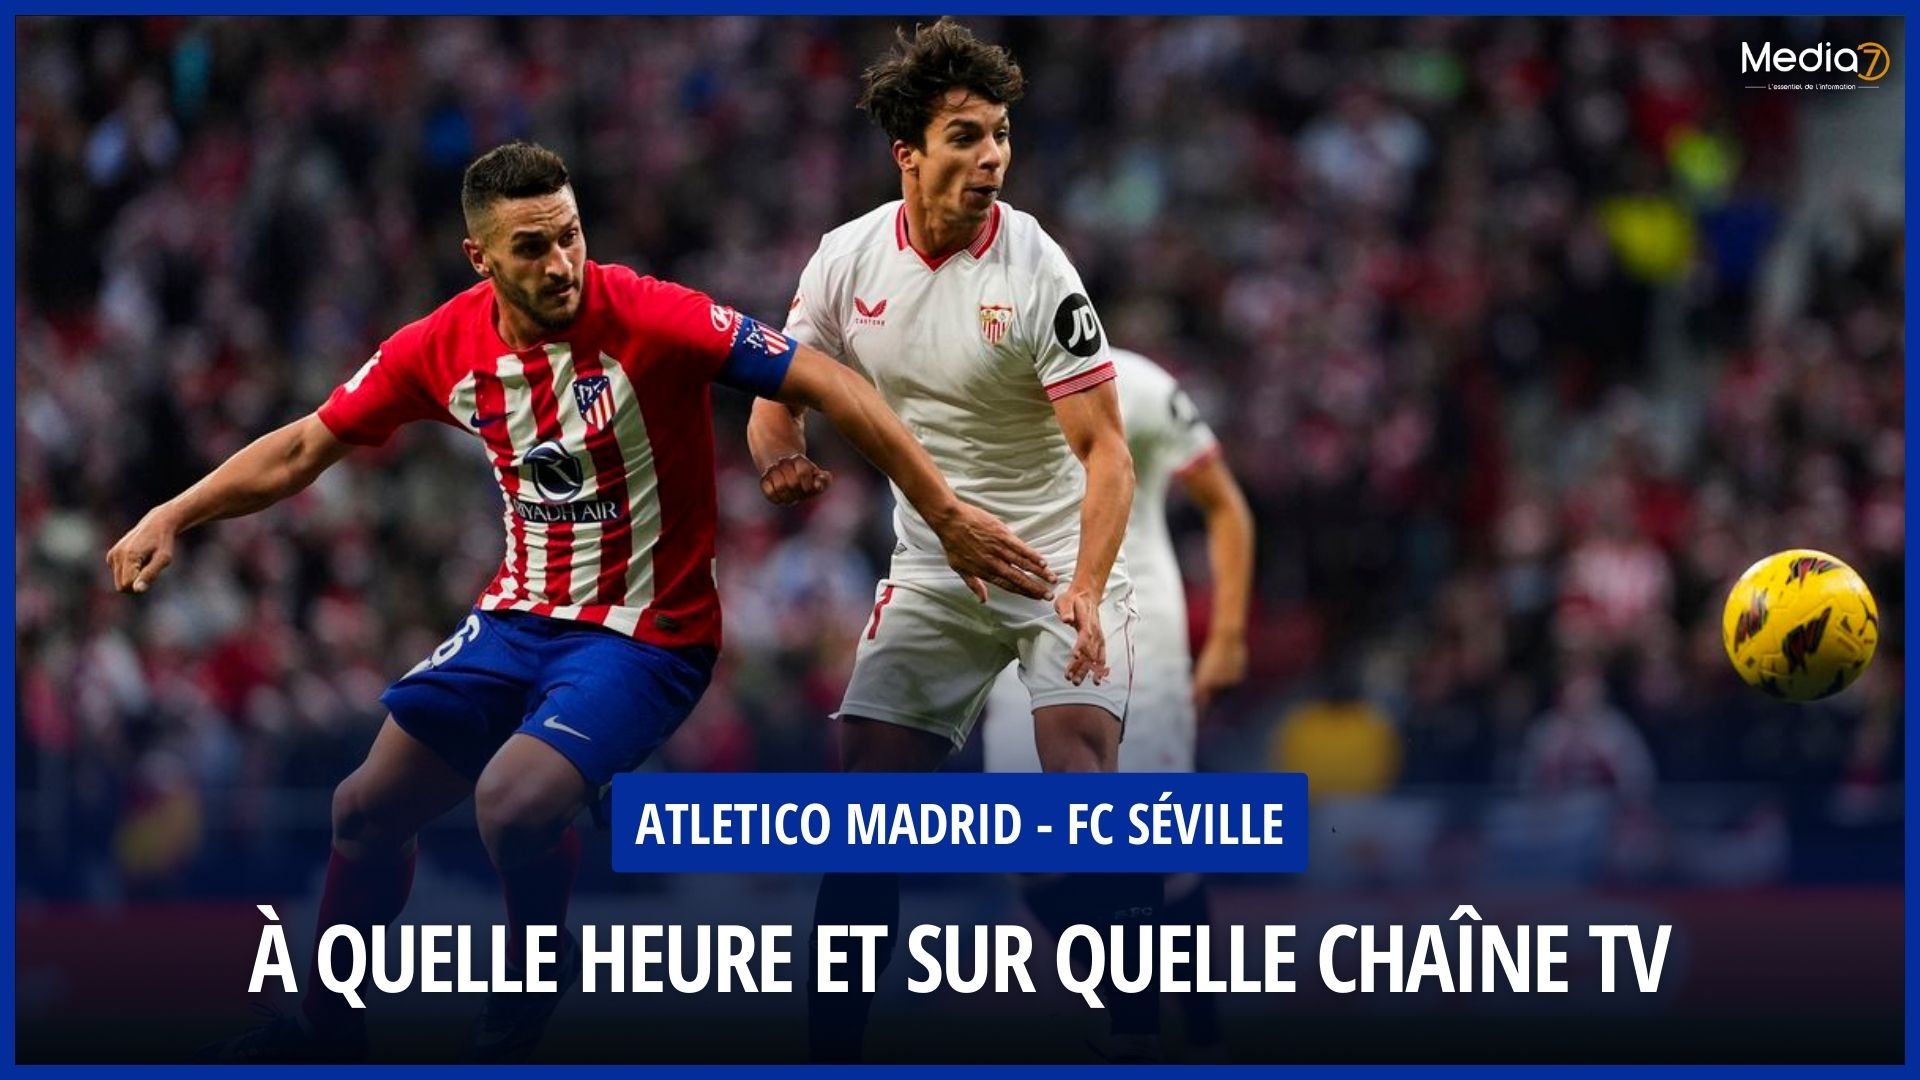 Atletico Madrid - Sevilla FC Match Live: TV Channel and Broadcast Schedule - Media7